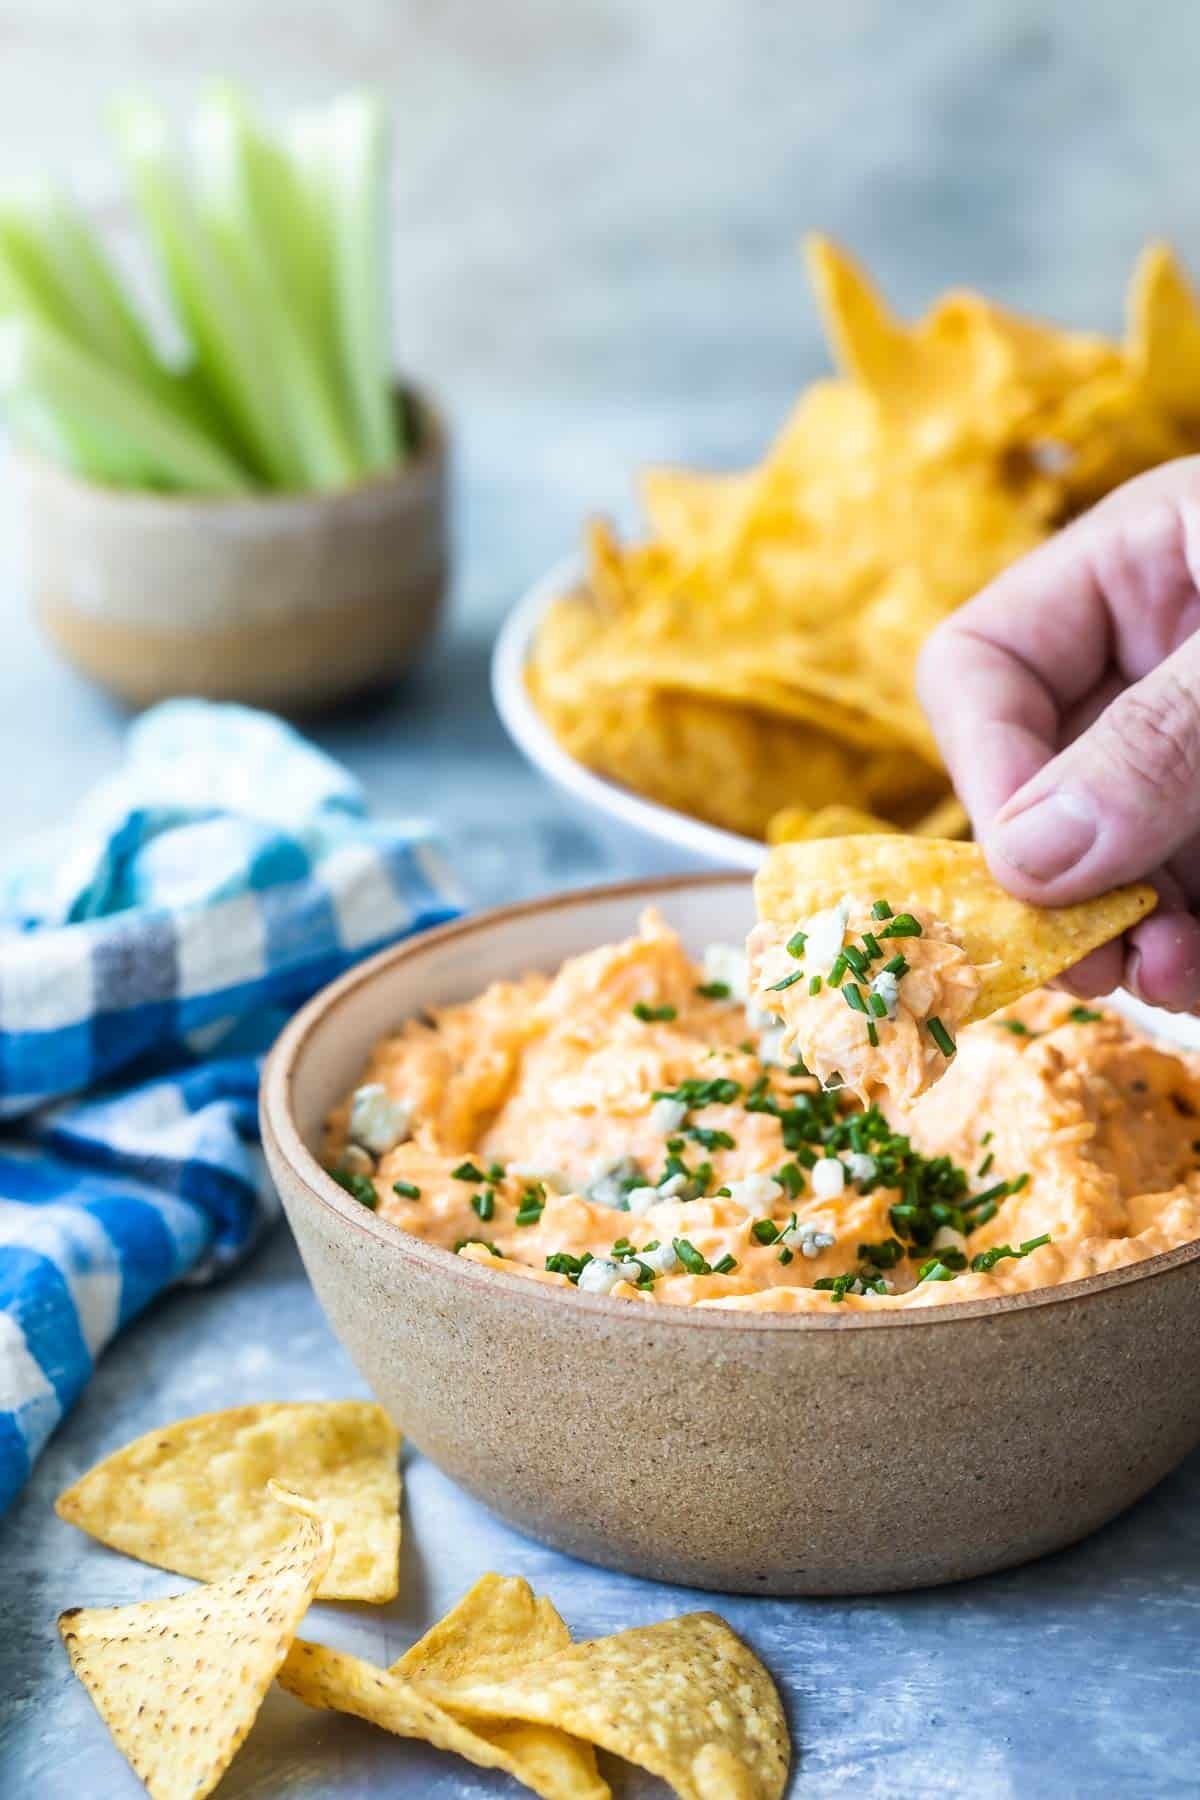 Buffalo chicken dip in a bowl with chips, crackers, and celery nearby.